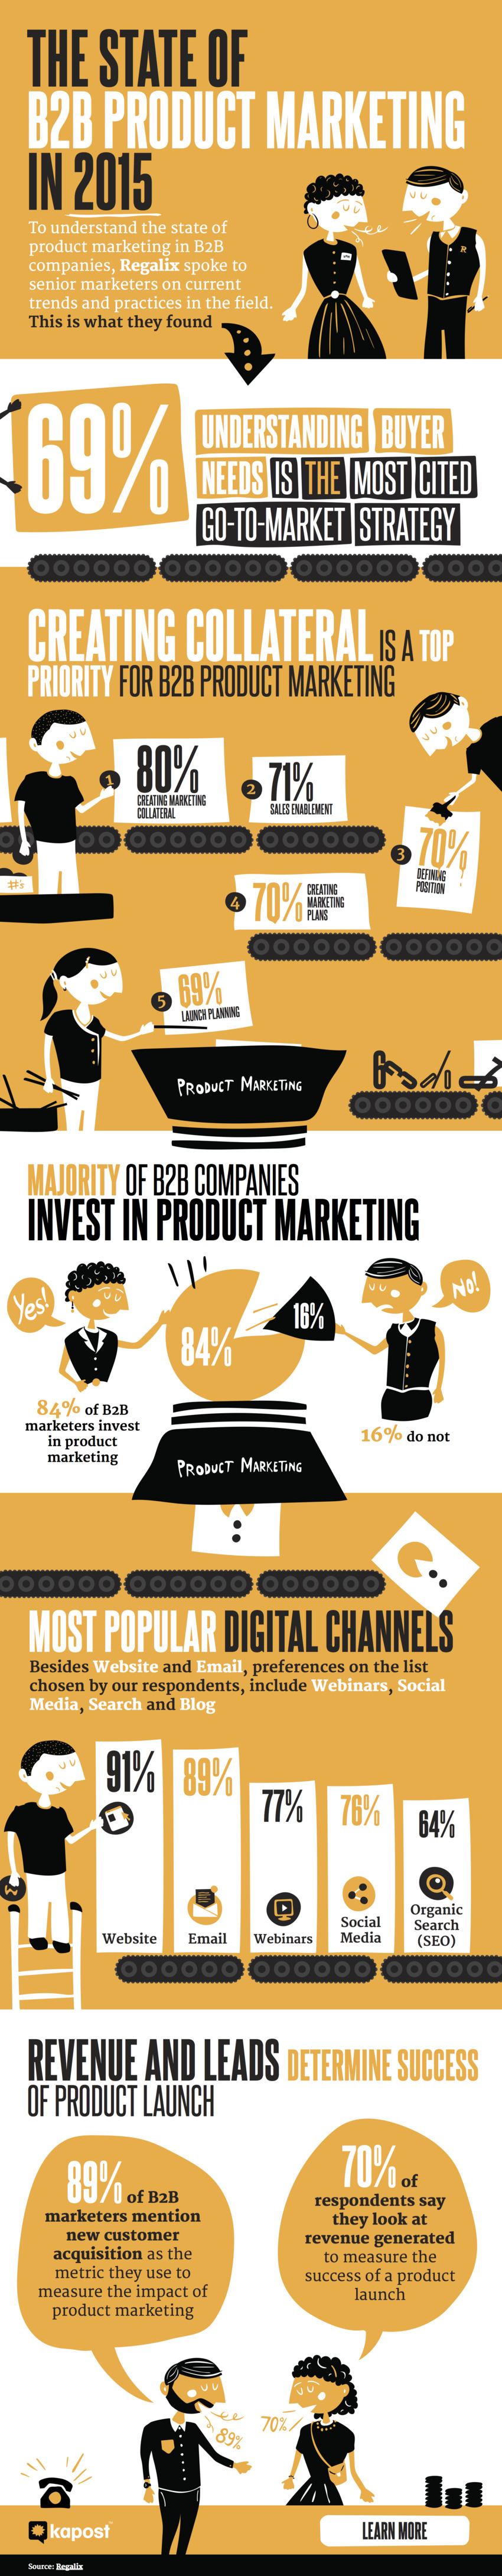 [INFOGRAPHIC] The State of B2B Product Marketing - Kapost Content Marketing Blog | The MarTech Digest | Scoop.it